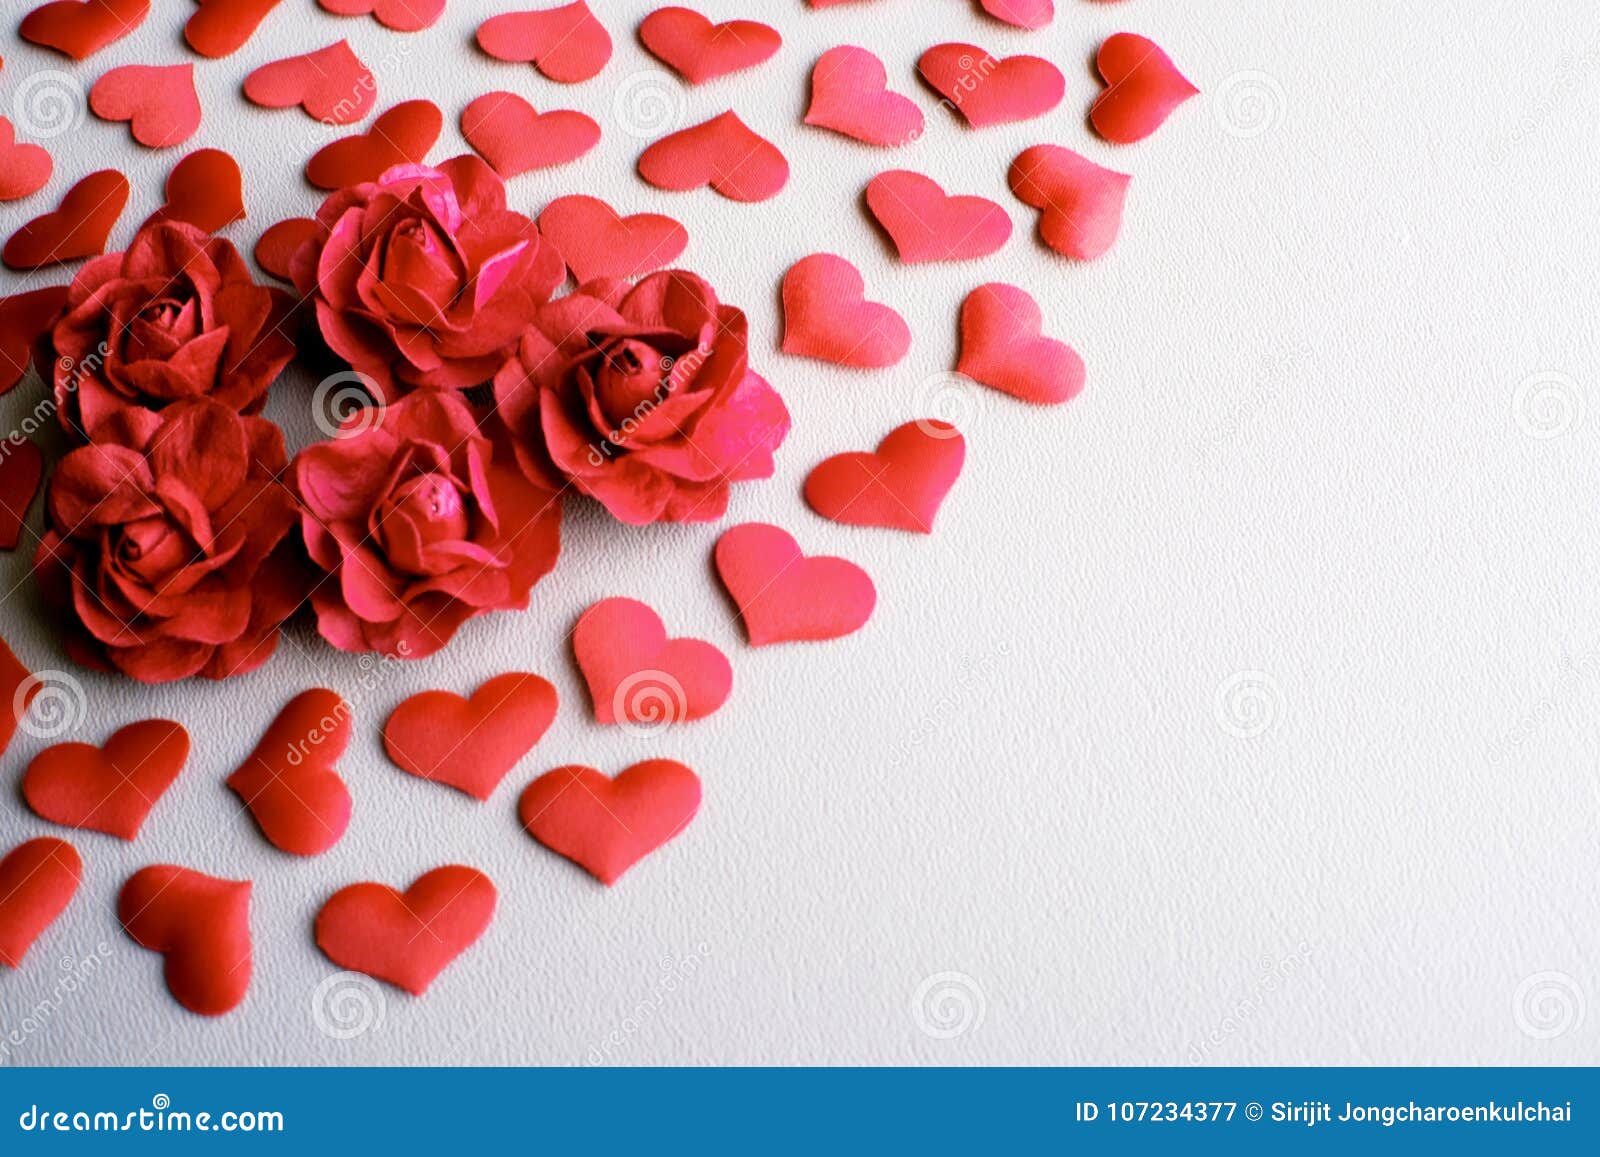 Love Valentines Day Romantic Background. Hearts and Roses ...